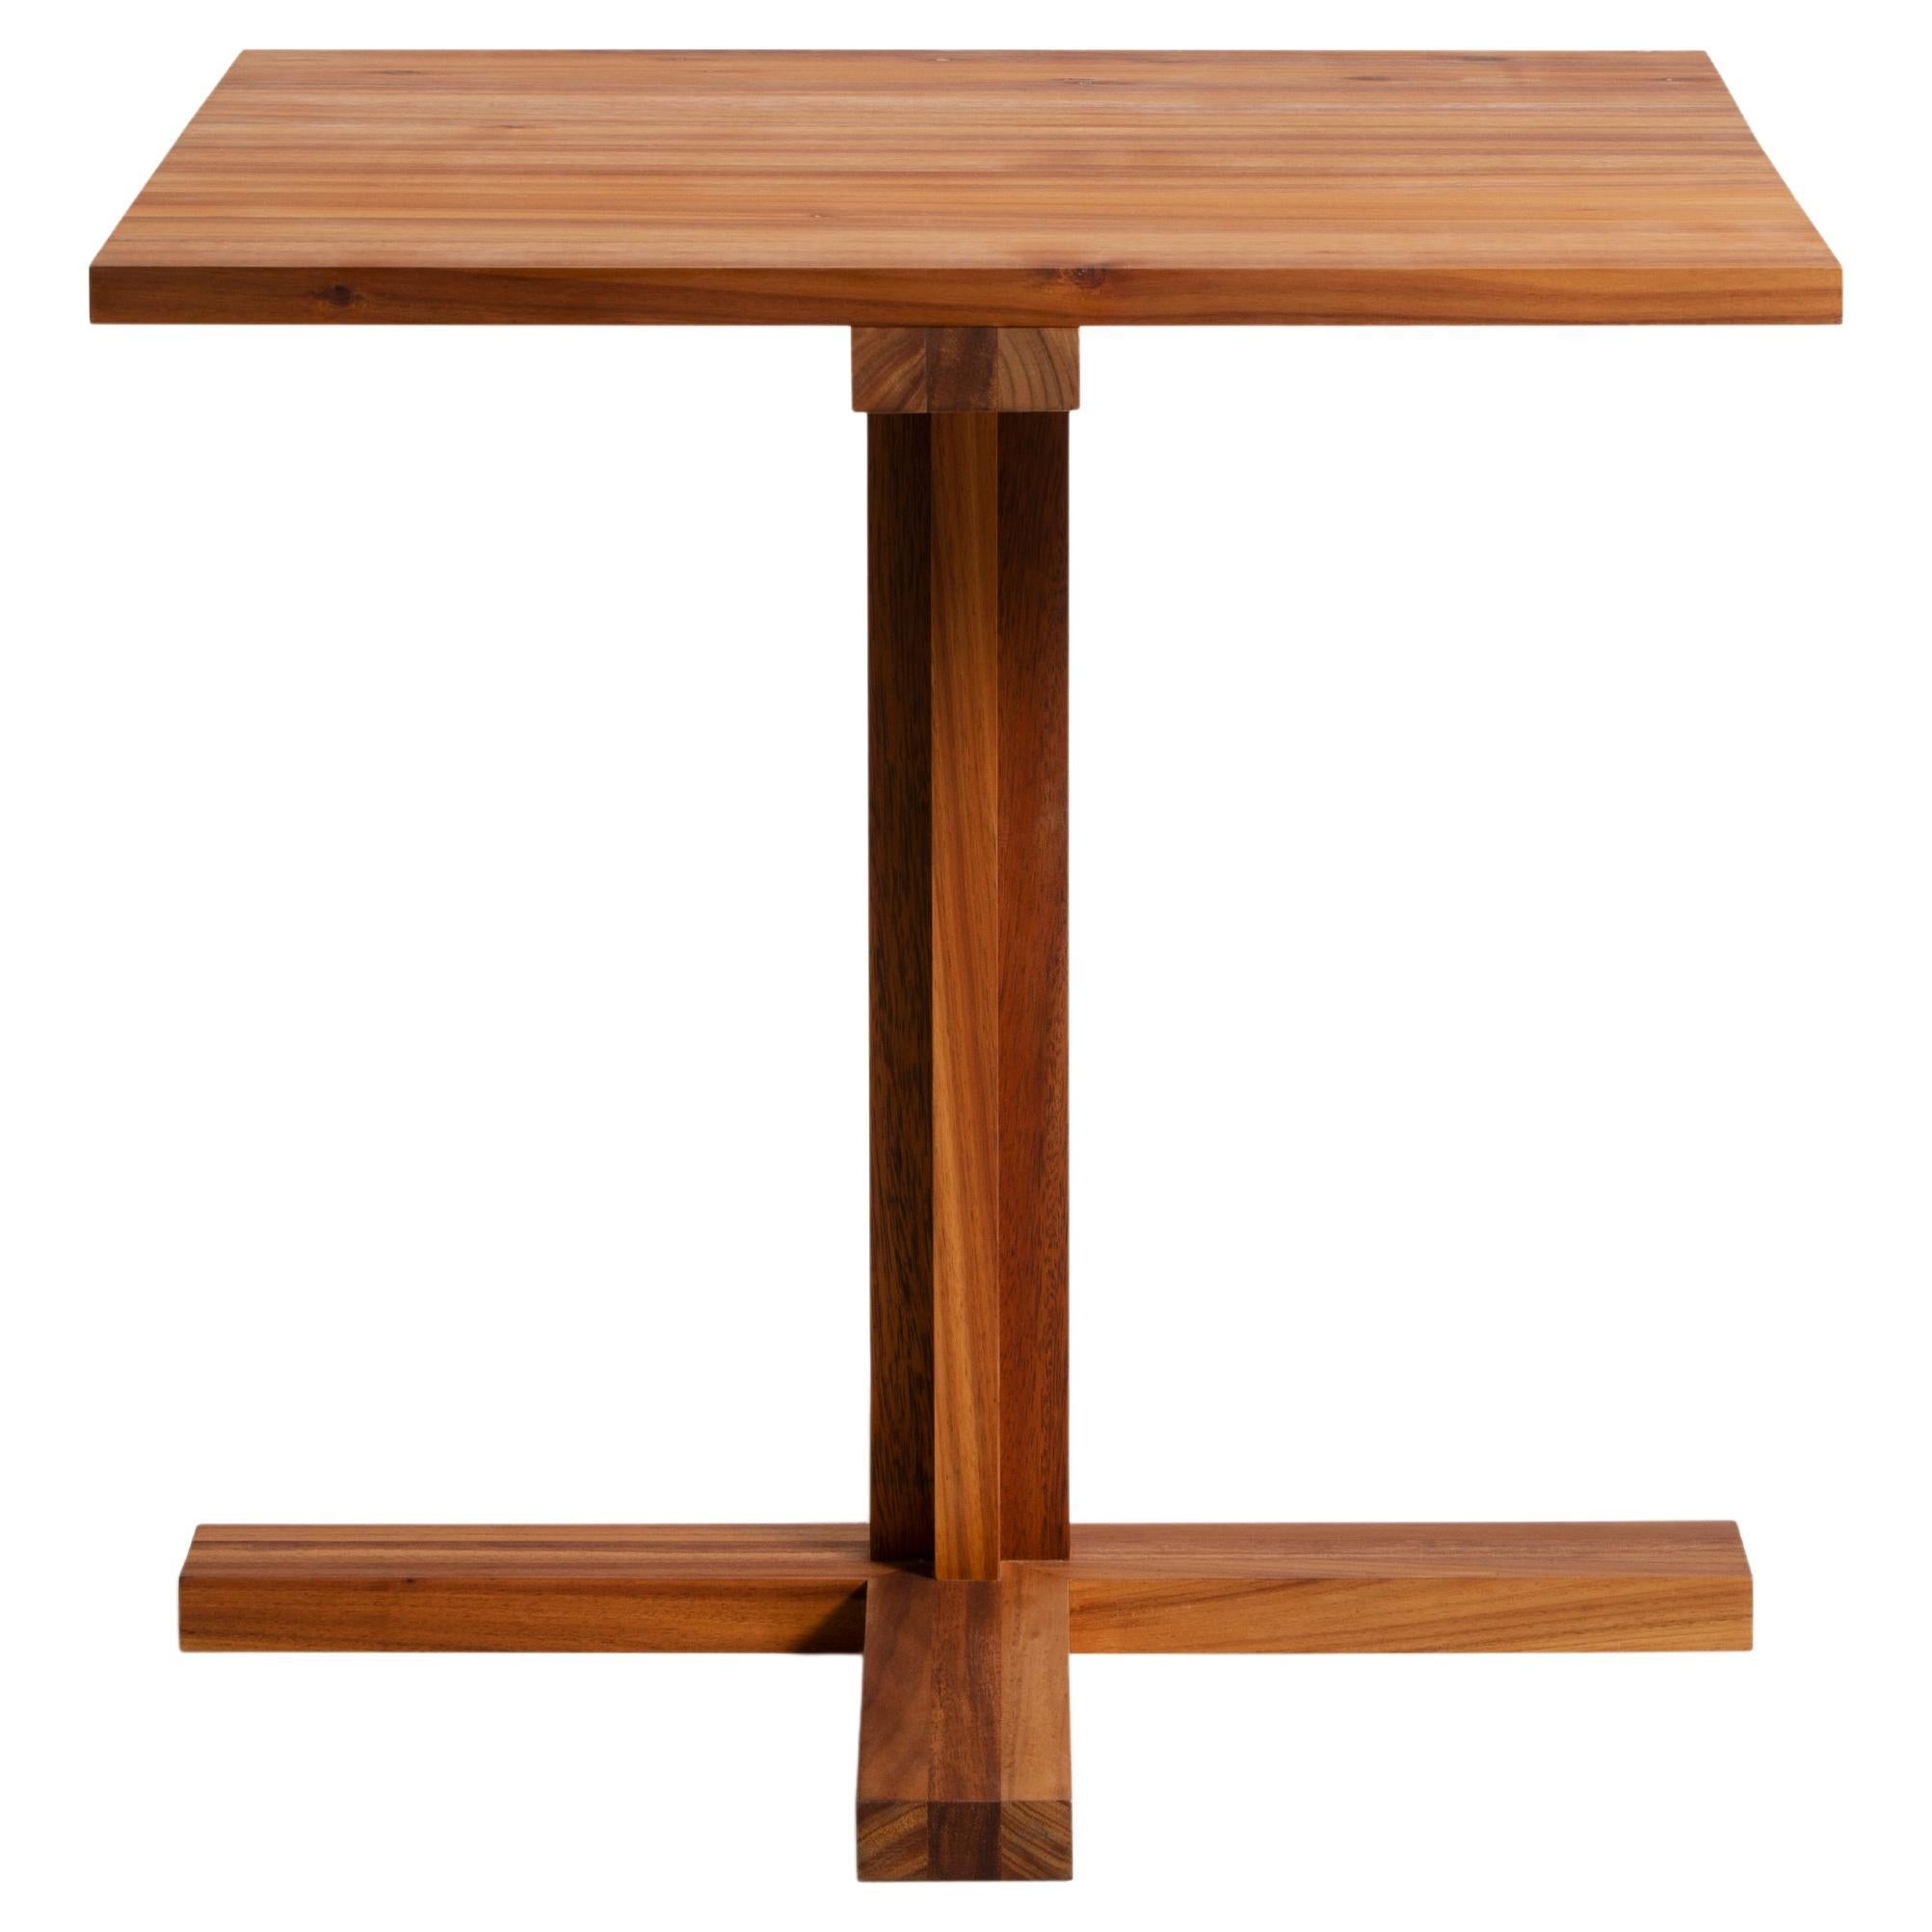 Alumina Square Wooden Table For Sale